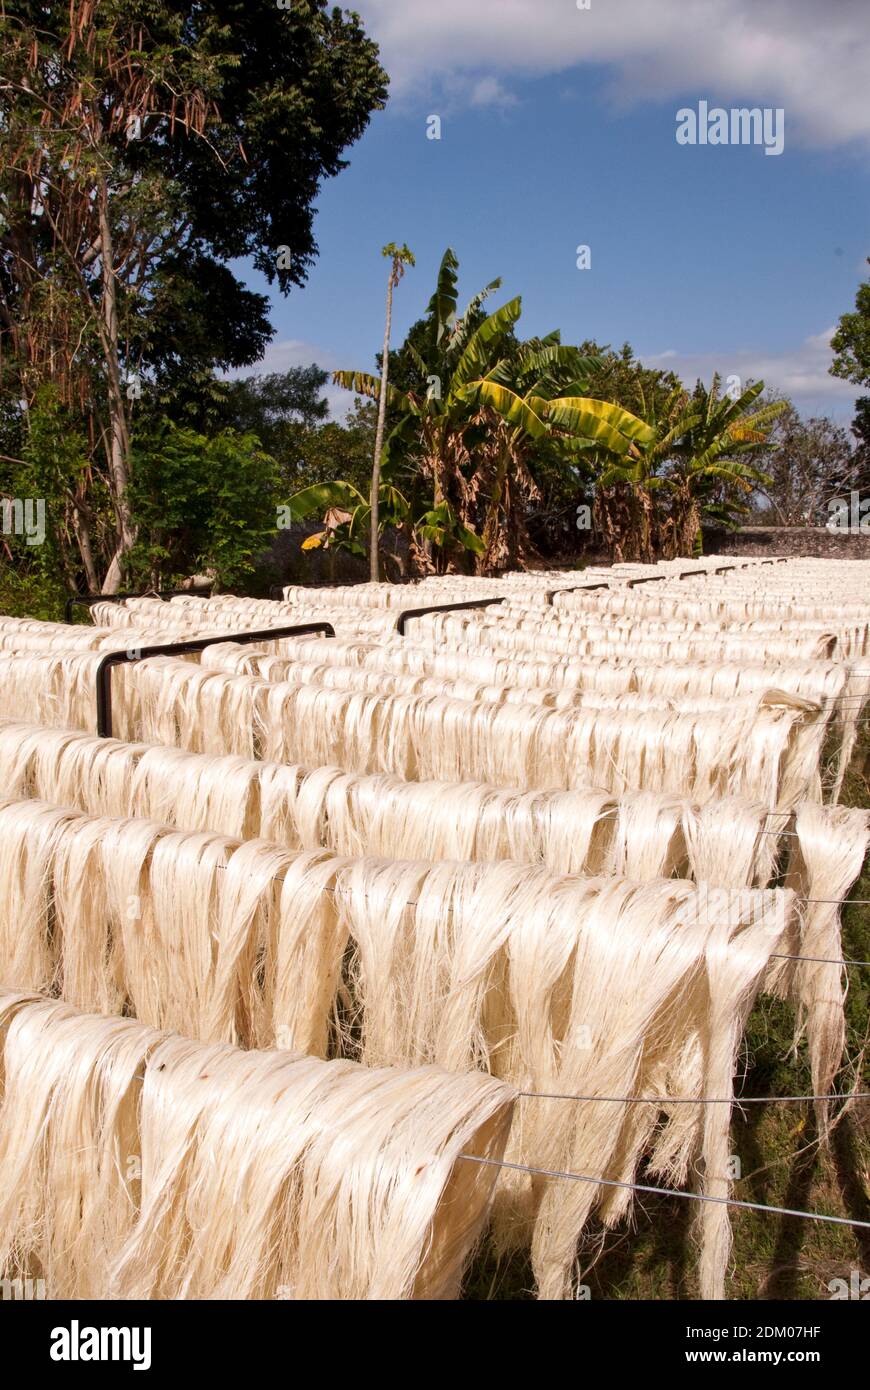 Henequen fibers, dry in the sun before being made into rope and twine, at the Hacienda Sotuta de Peon, Yucatan, Mexico. Stock Photo